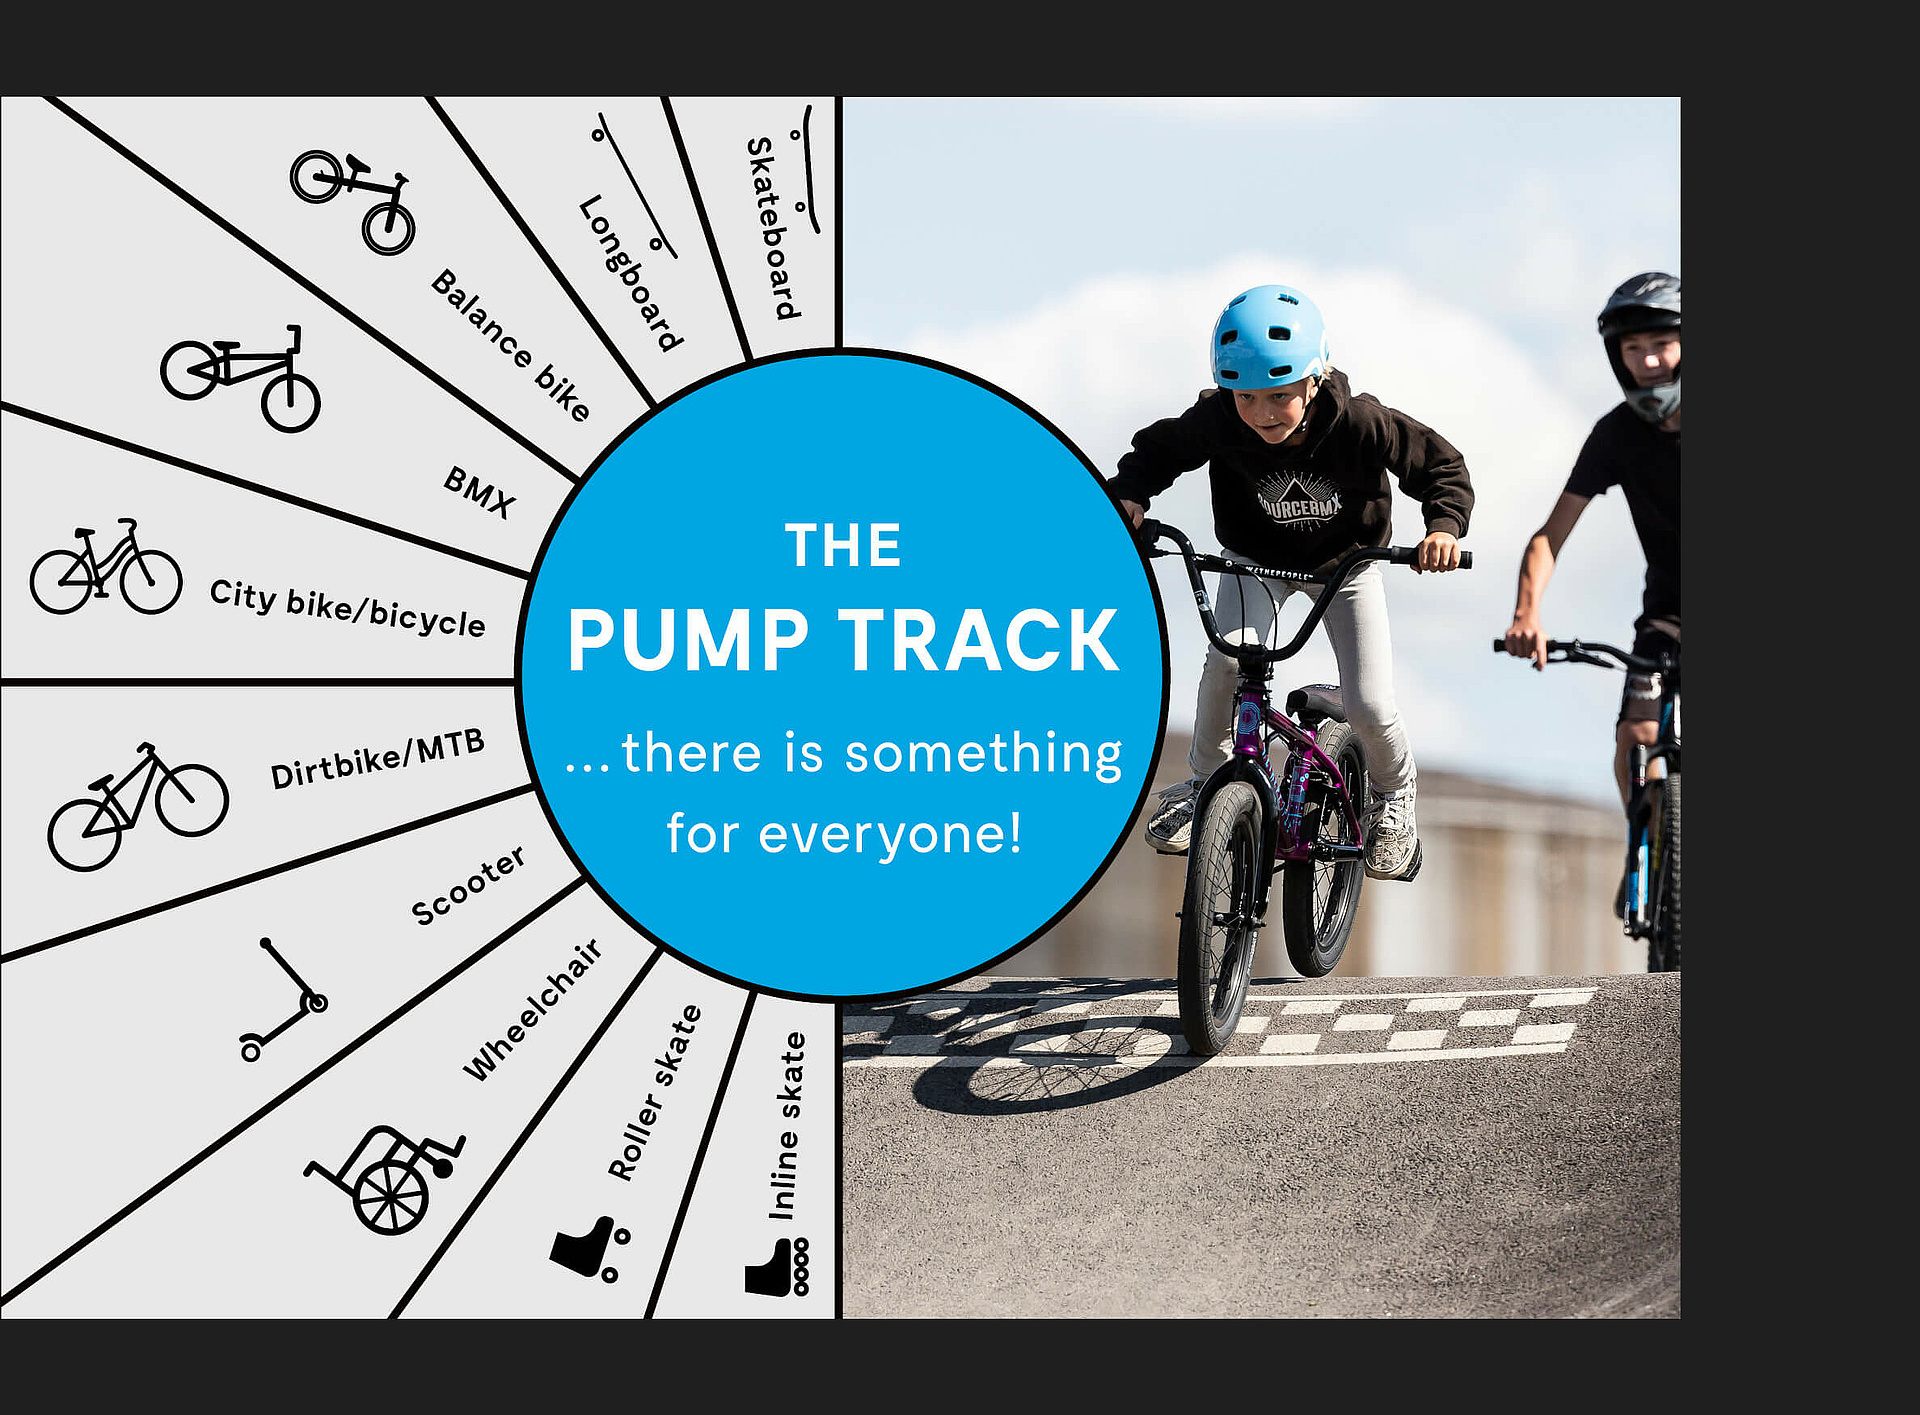 Graphic that shows what sports equipment can be ridden in the pump track